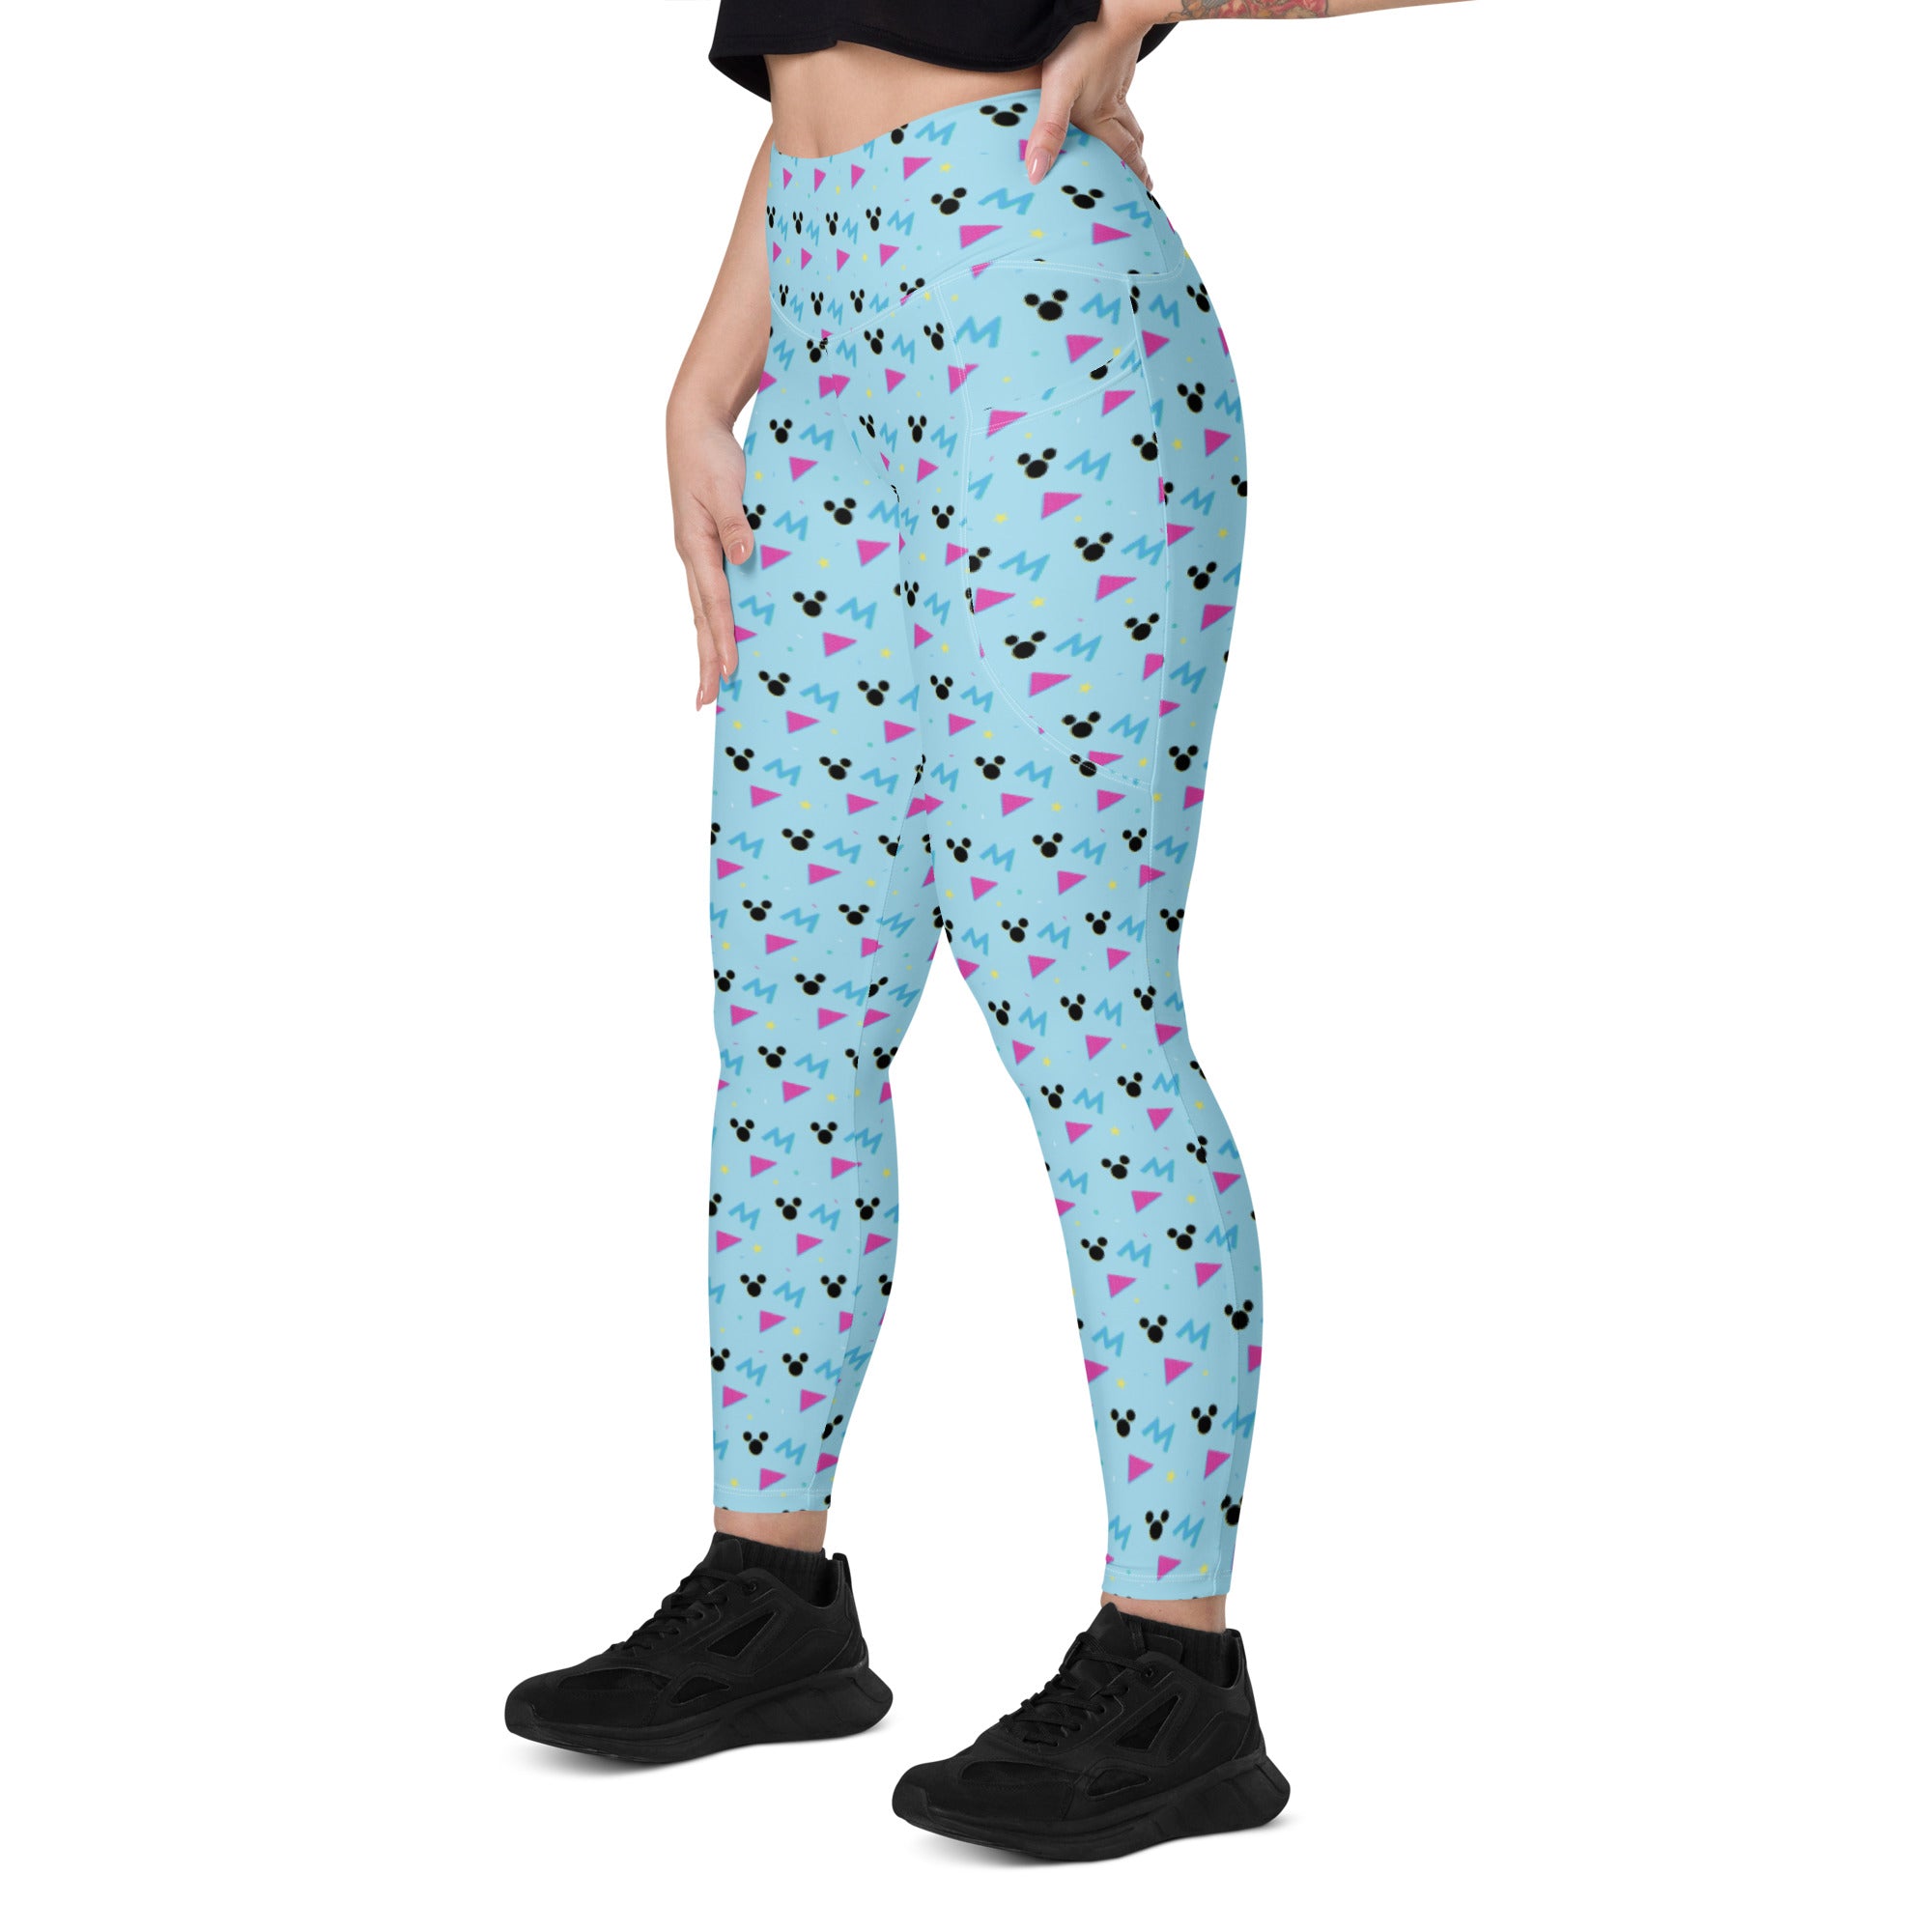 Mouse Leggings with pockets